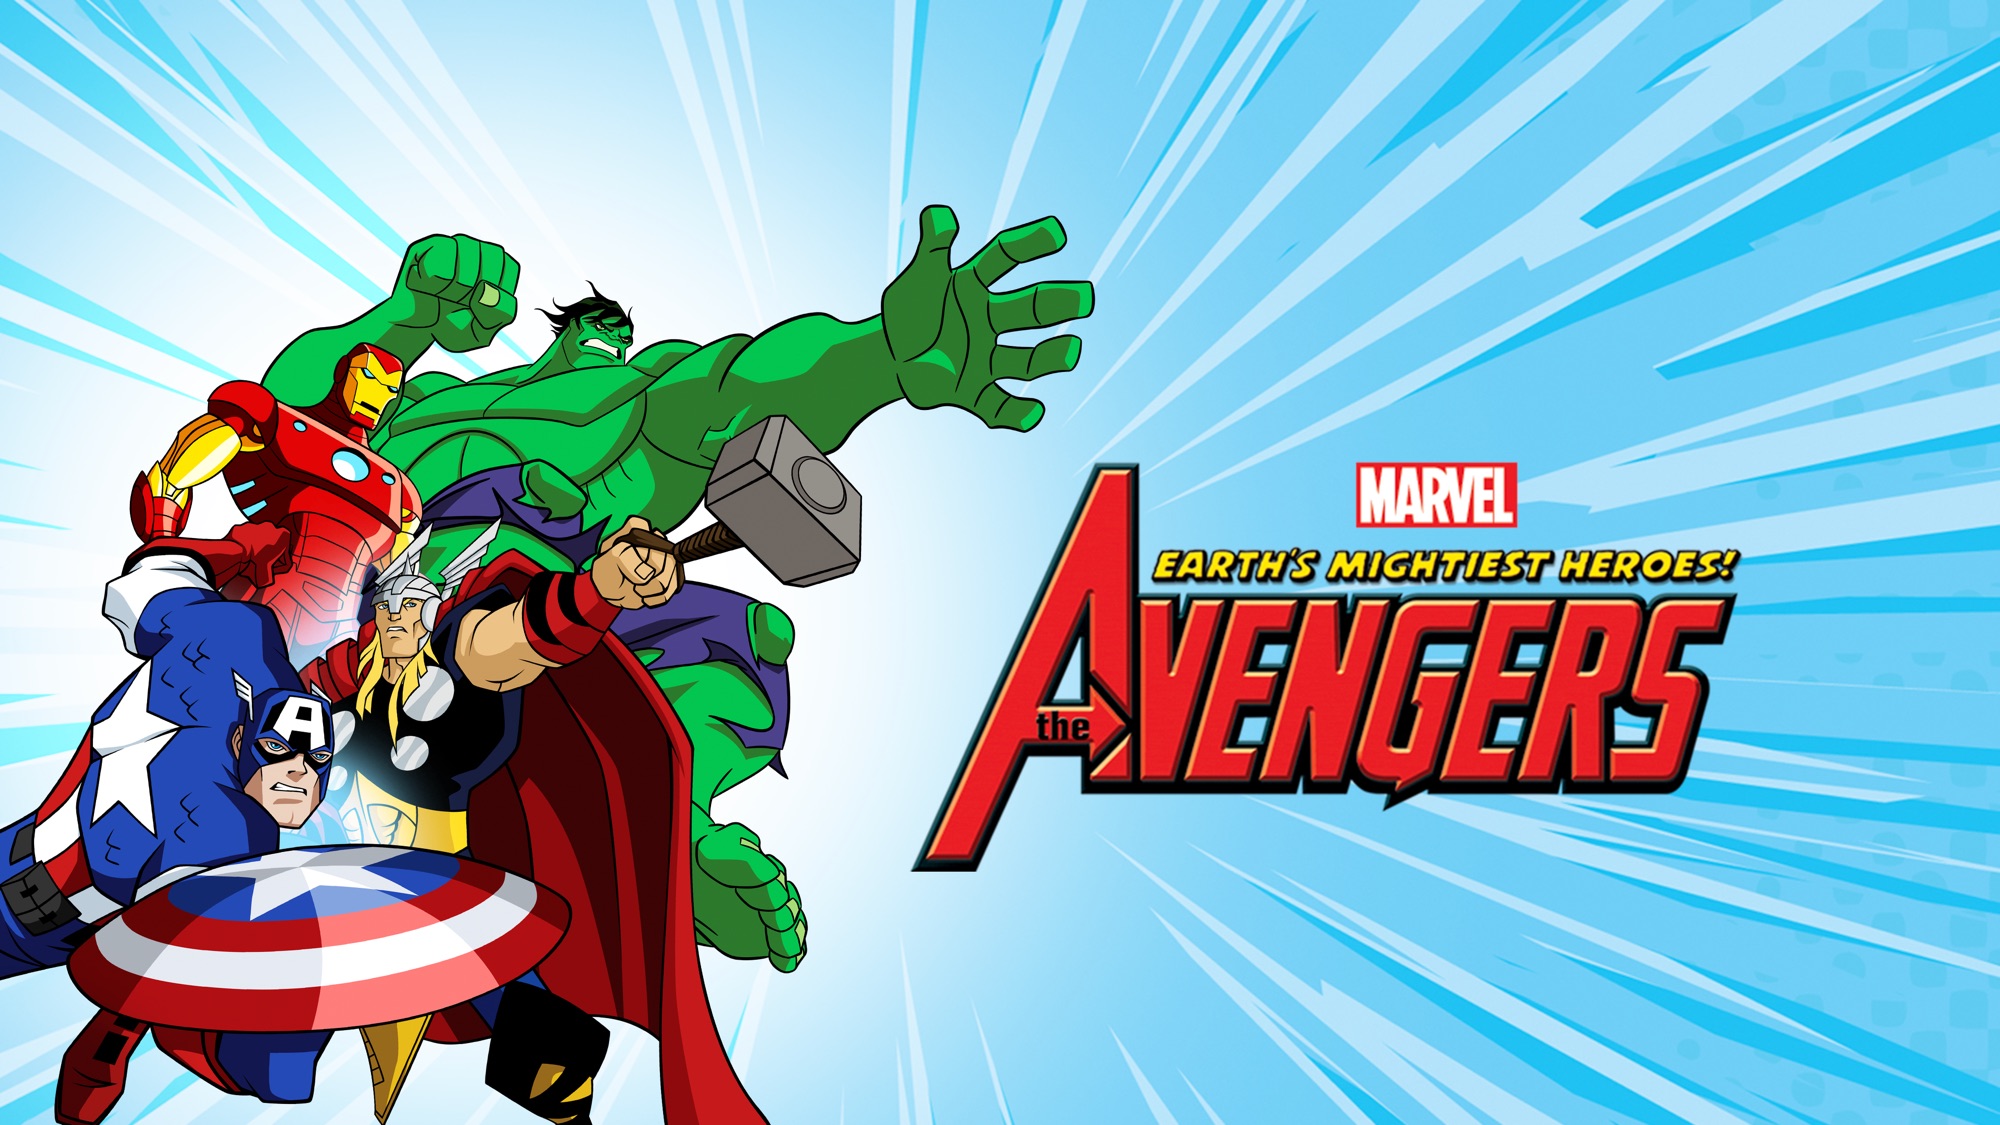 Avengers: Earth's Mightiest Heroes HD desktop wallpaper featuring iconic characters from the TV show in action-packed poses.